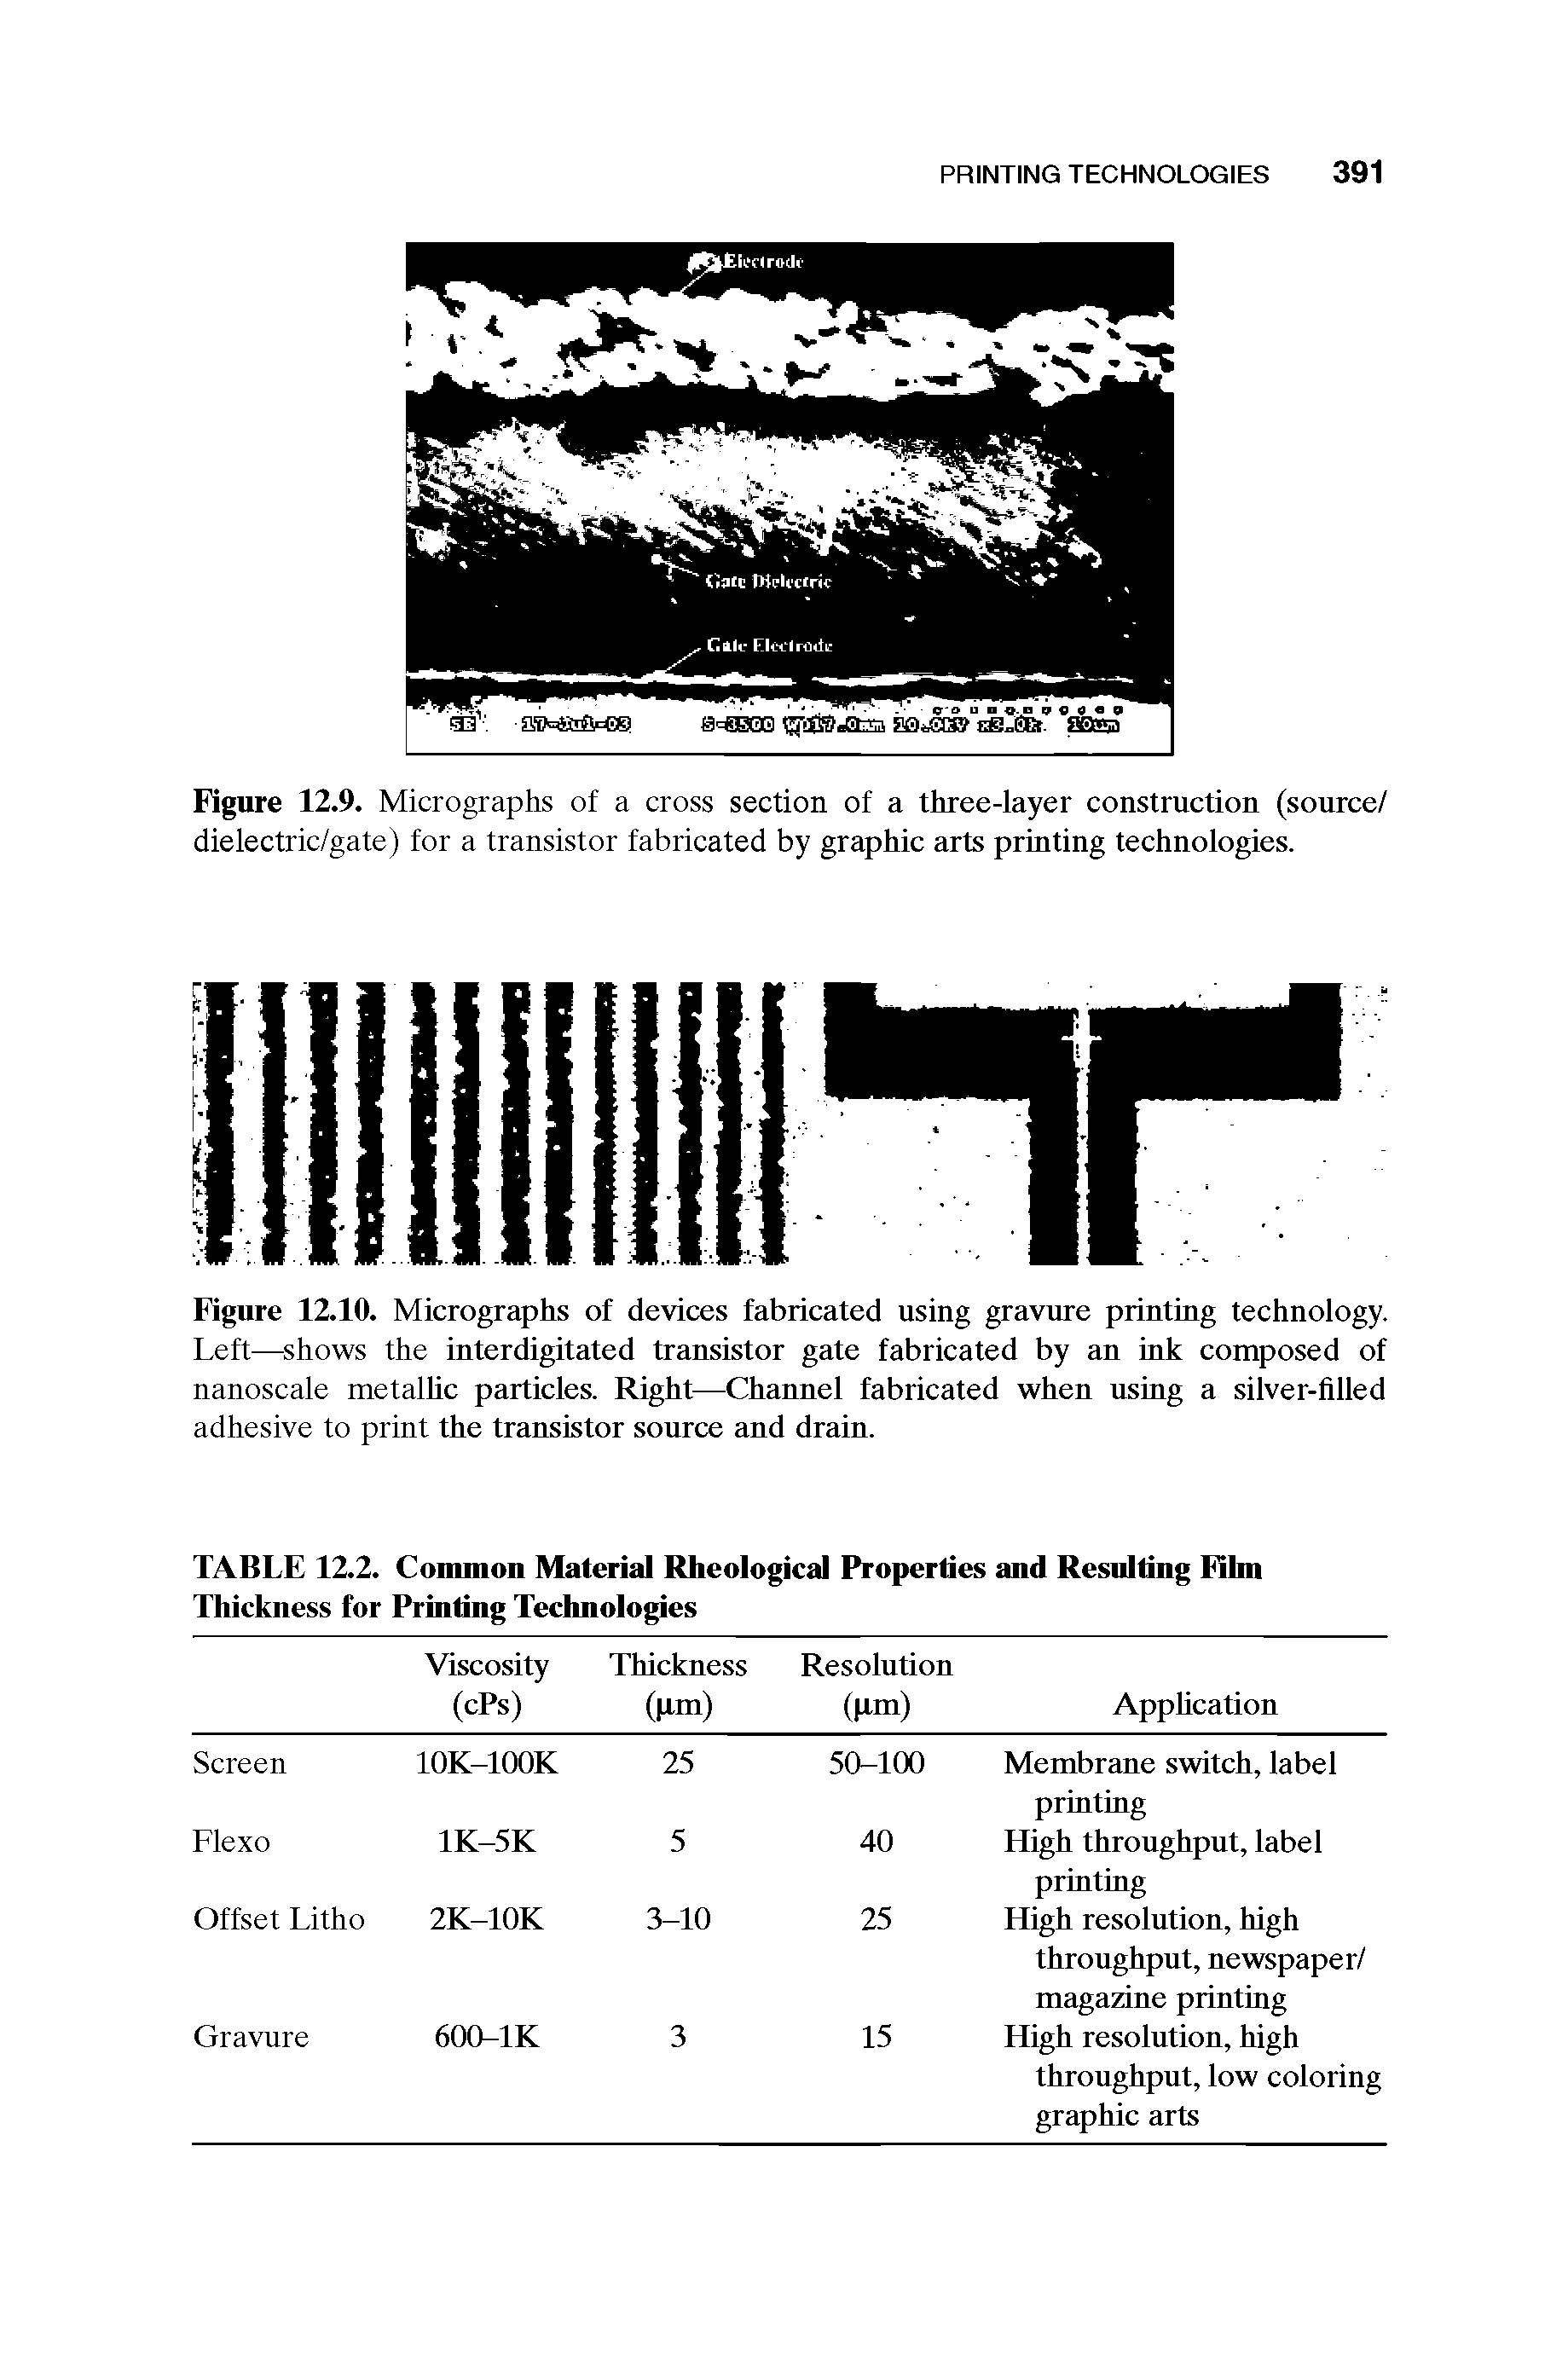 Figure 12.10. Micrographs of devices fabricated using gravure printing technology. Left—shows the interdigitated transistor gate fabricated by an ink composed of nanoscale metallic particles. Right—Channel fabricated when using a silver-filled adhesive to print the transistor source and drain.